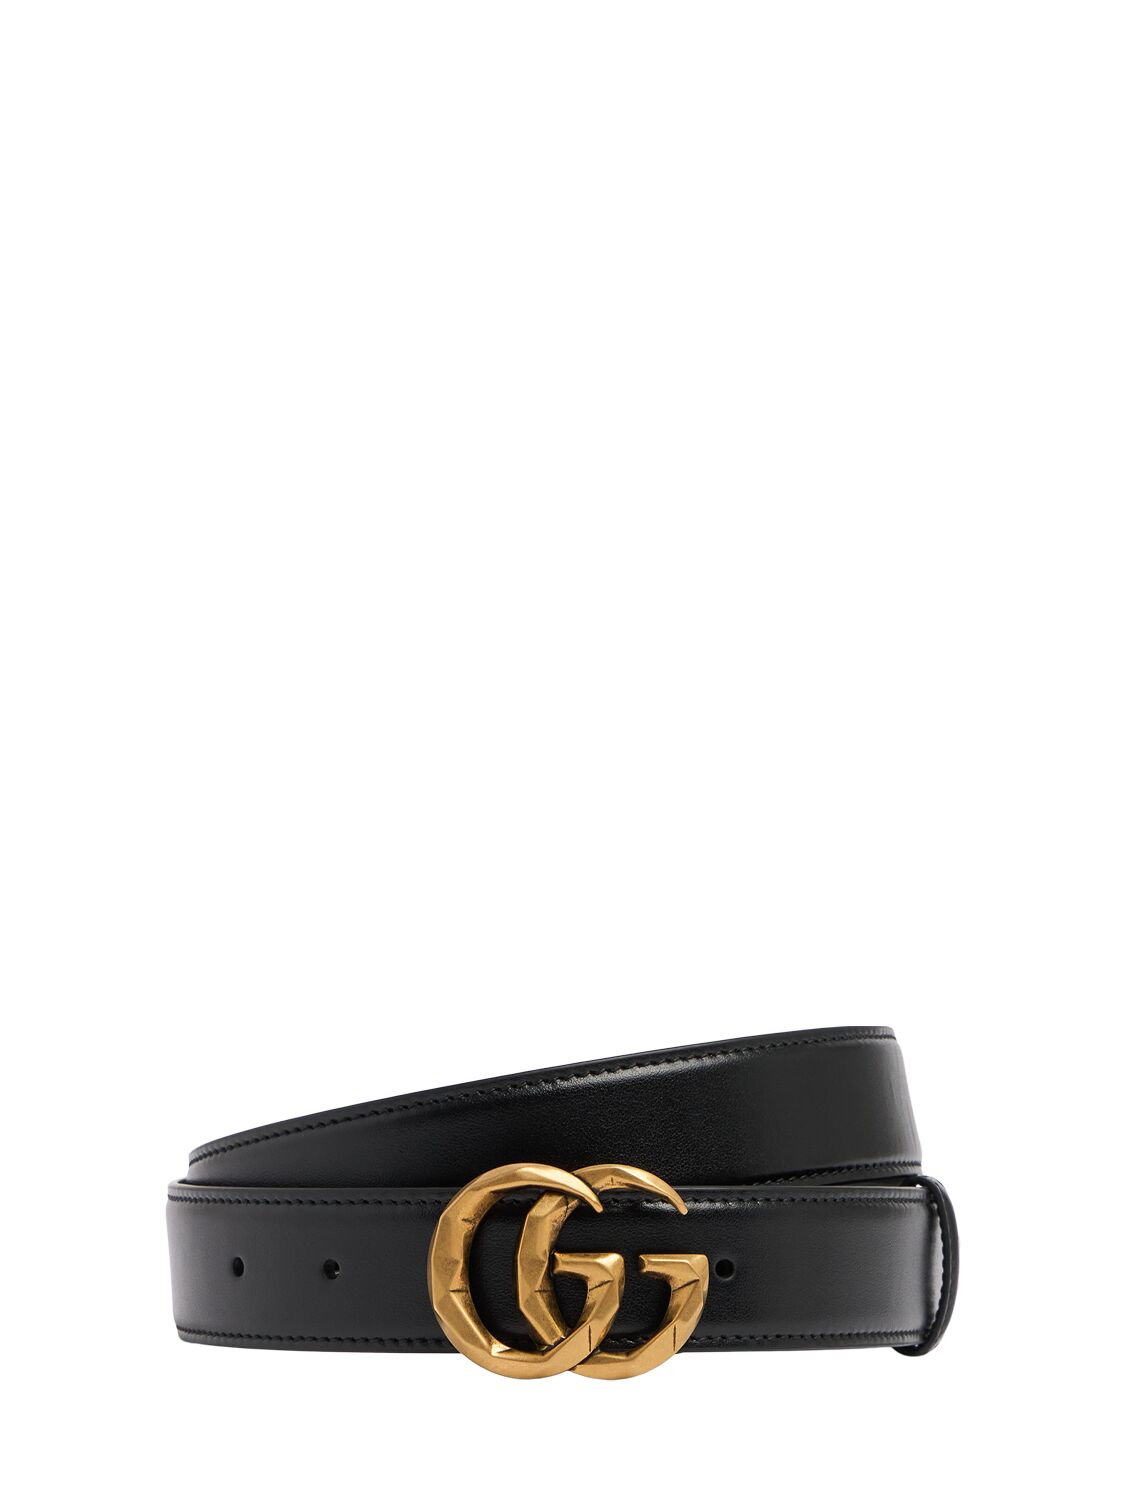 Gucci 3cm Gg Marmont Leather Belt In Black